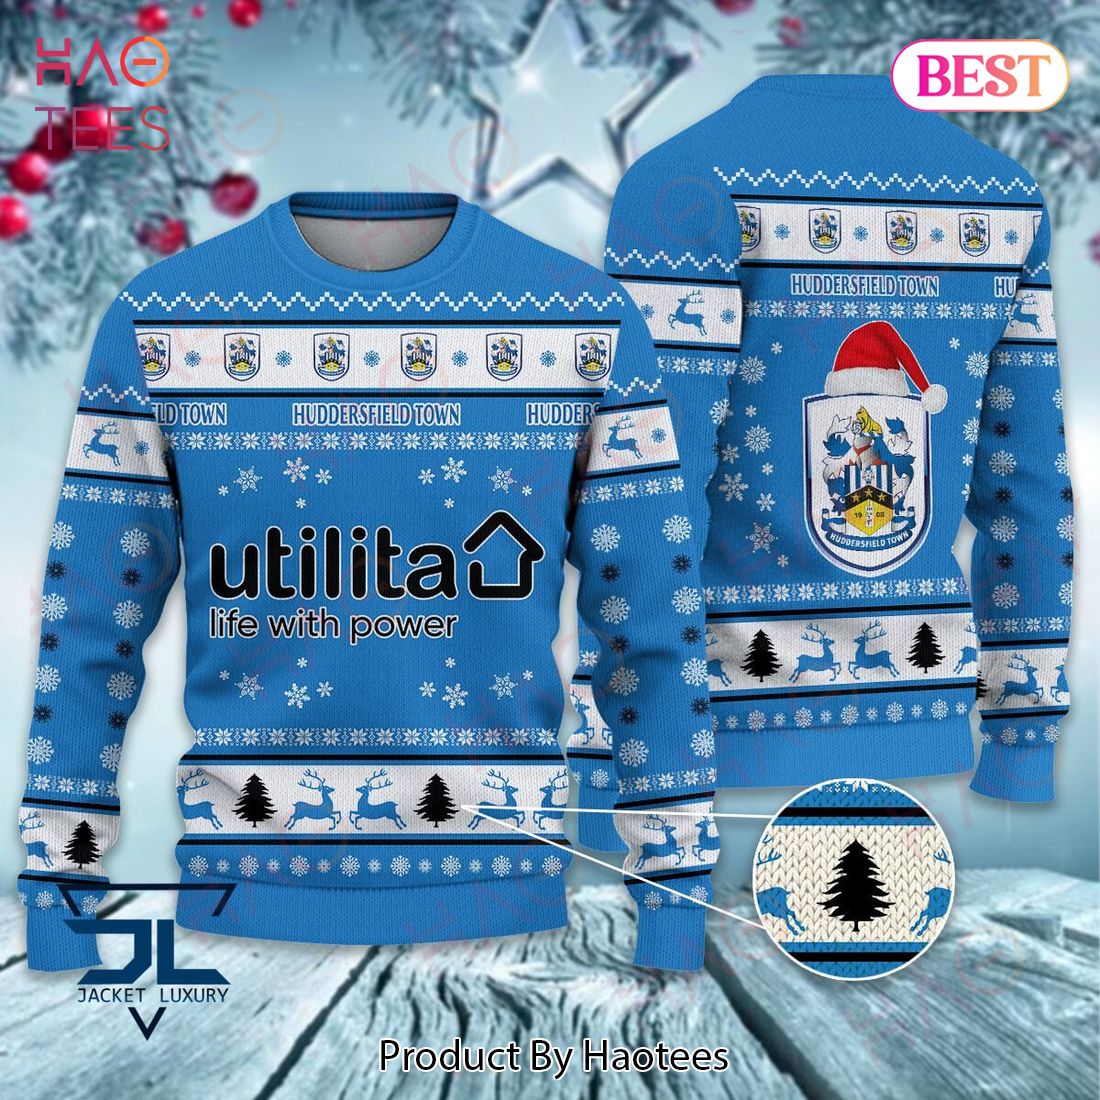 HOT Huddersfield Town A.F.C Christmas Luxury Brand Sweater Limited Edition